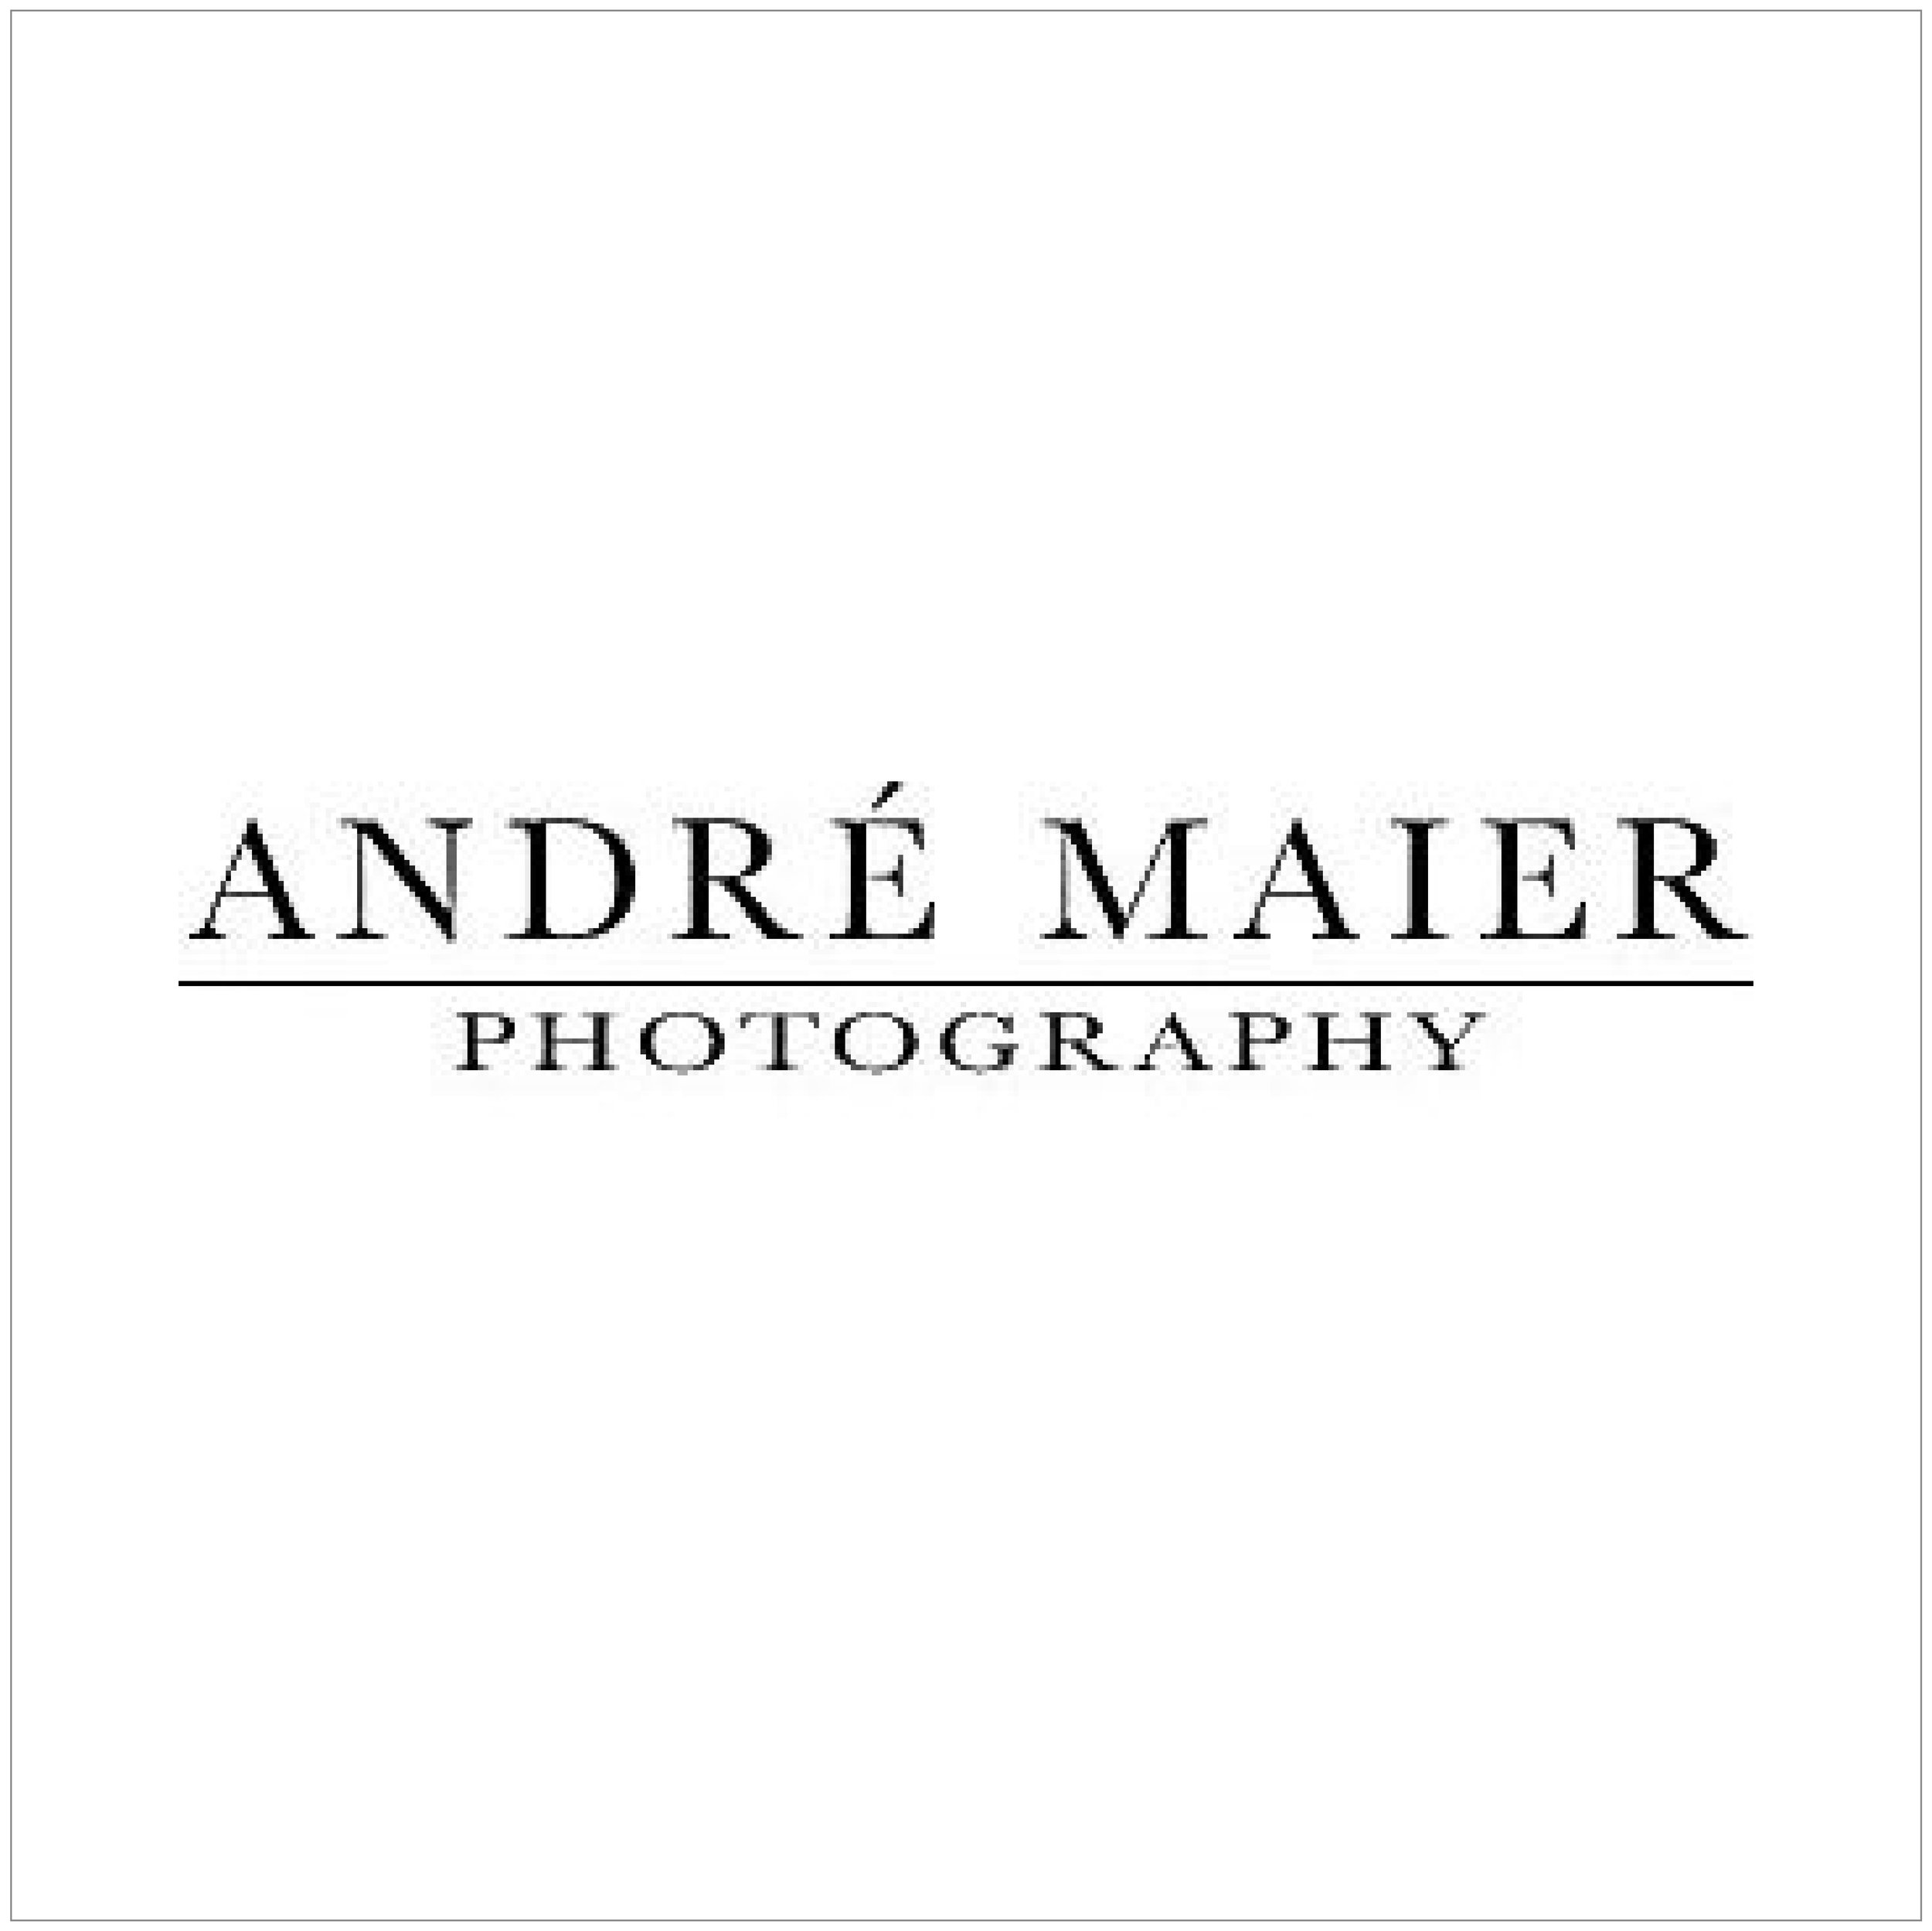 ANDRÉ MAIER PHOTOGRAPHY